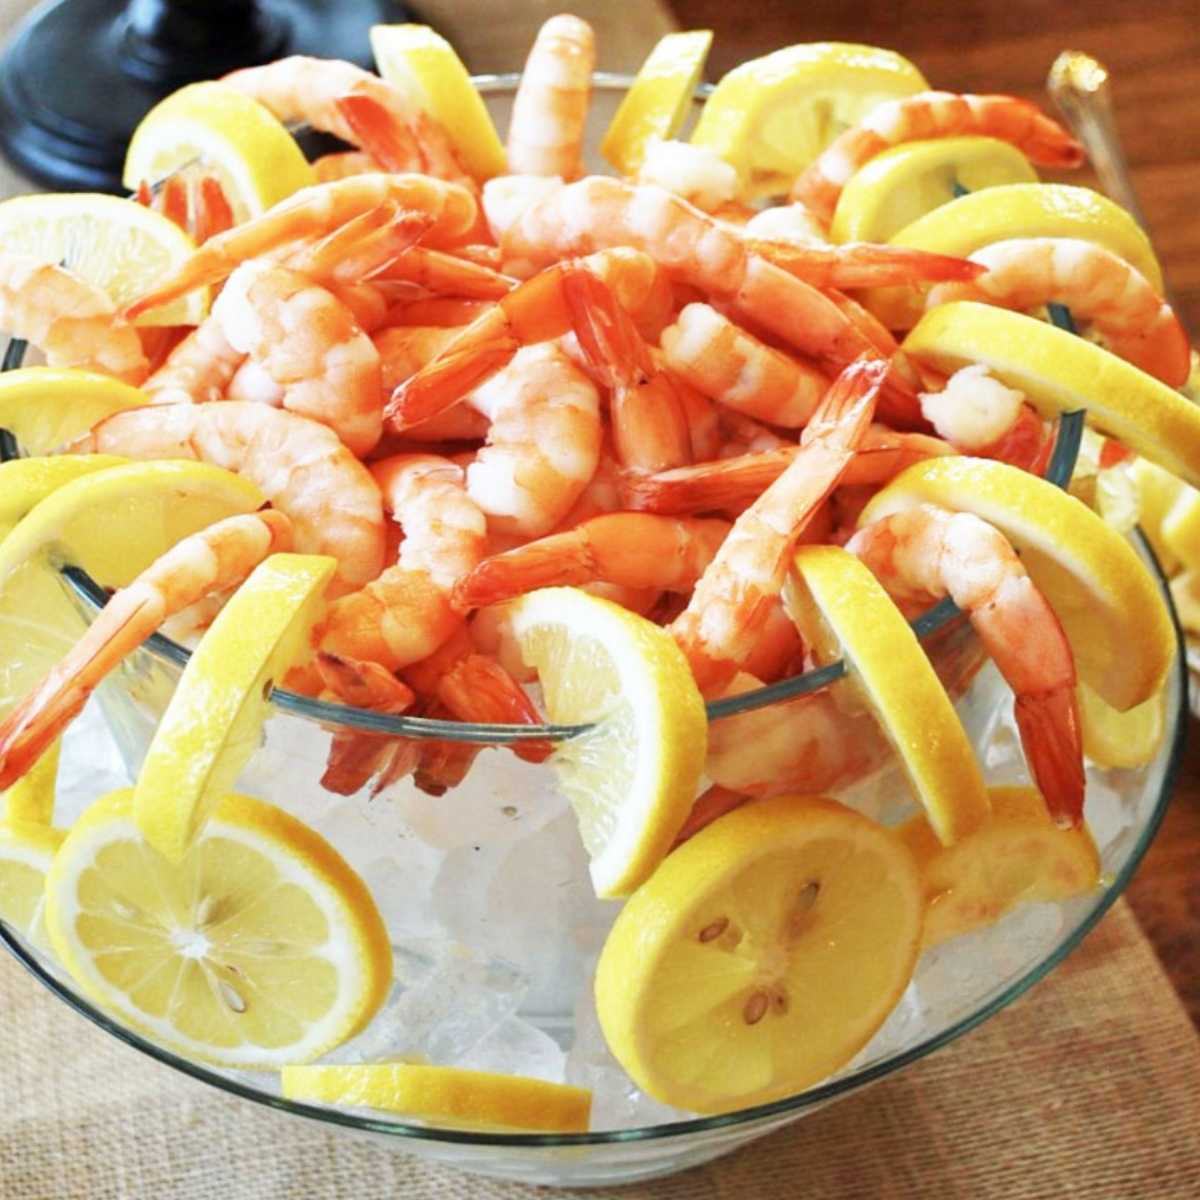 How to Make an Ice Bowl for Shrimp Cocktail - Celebrate & Decorate